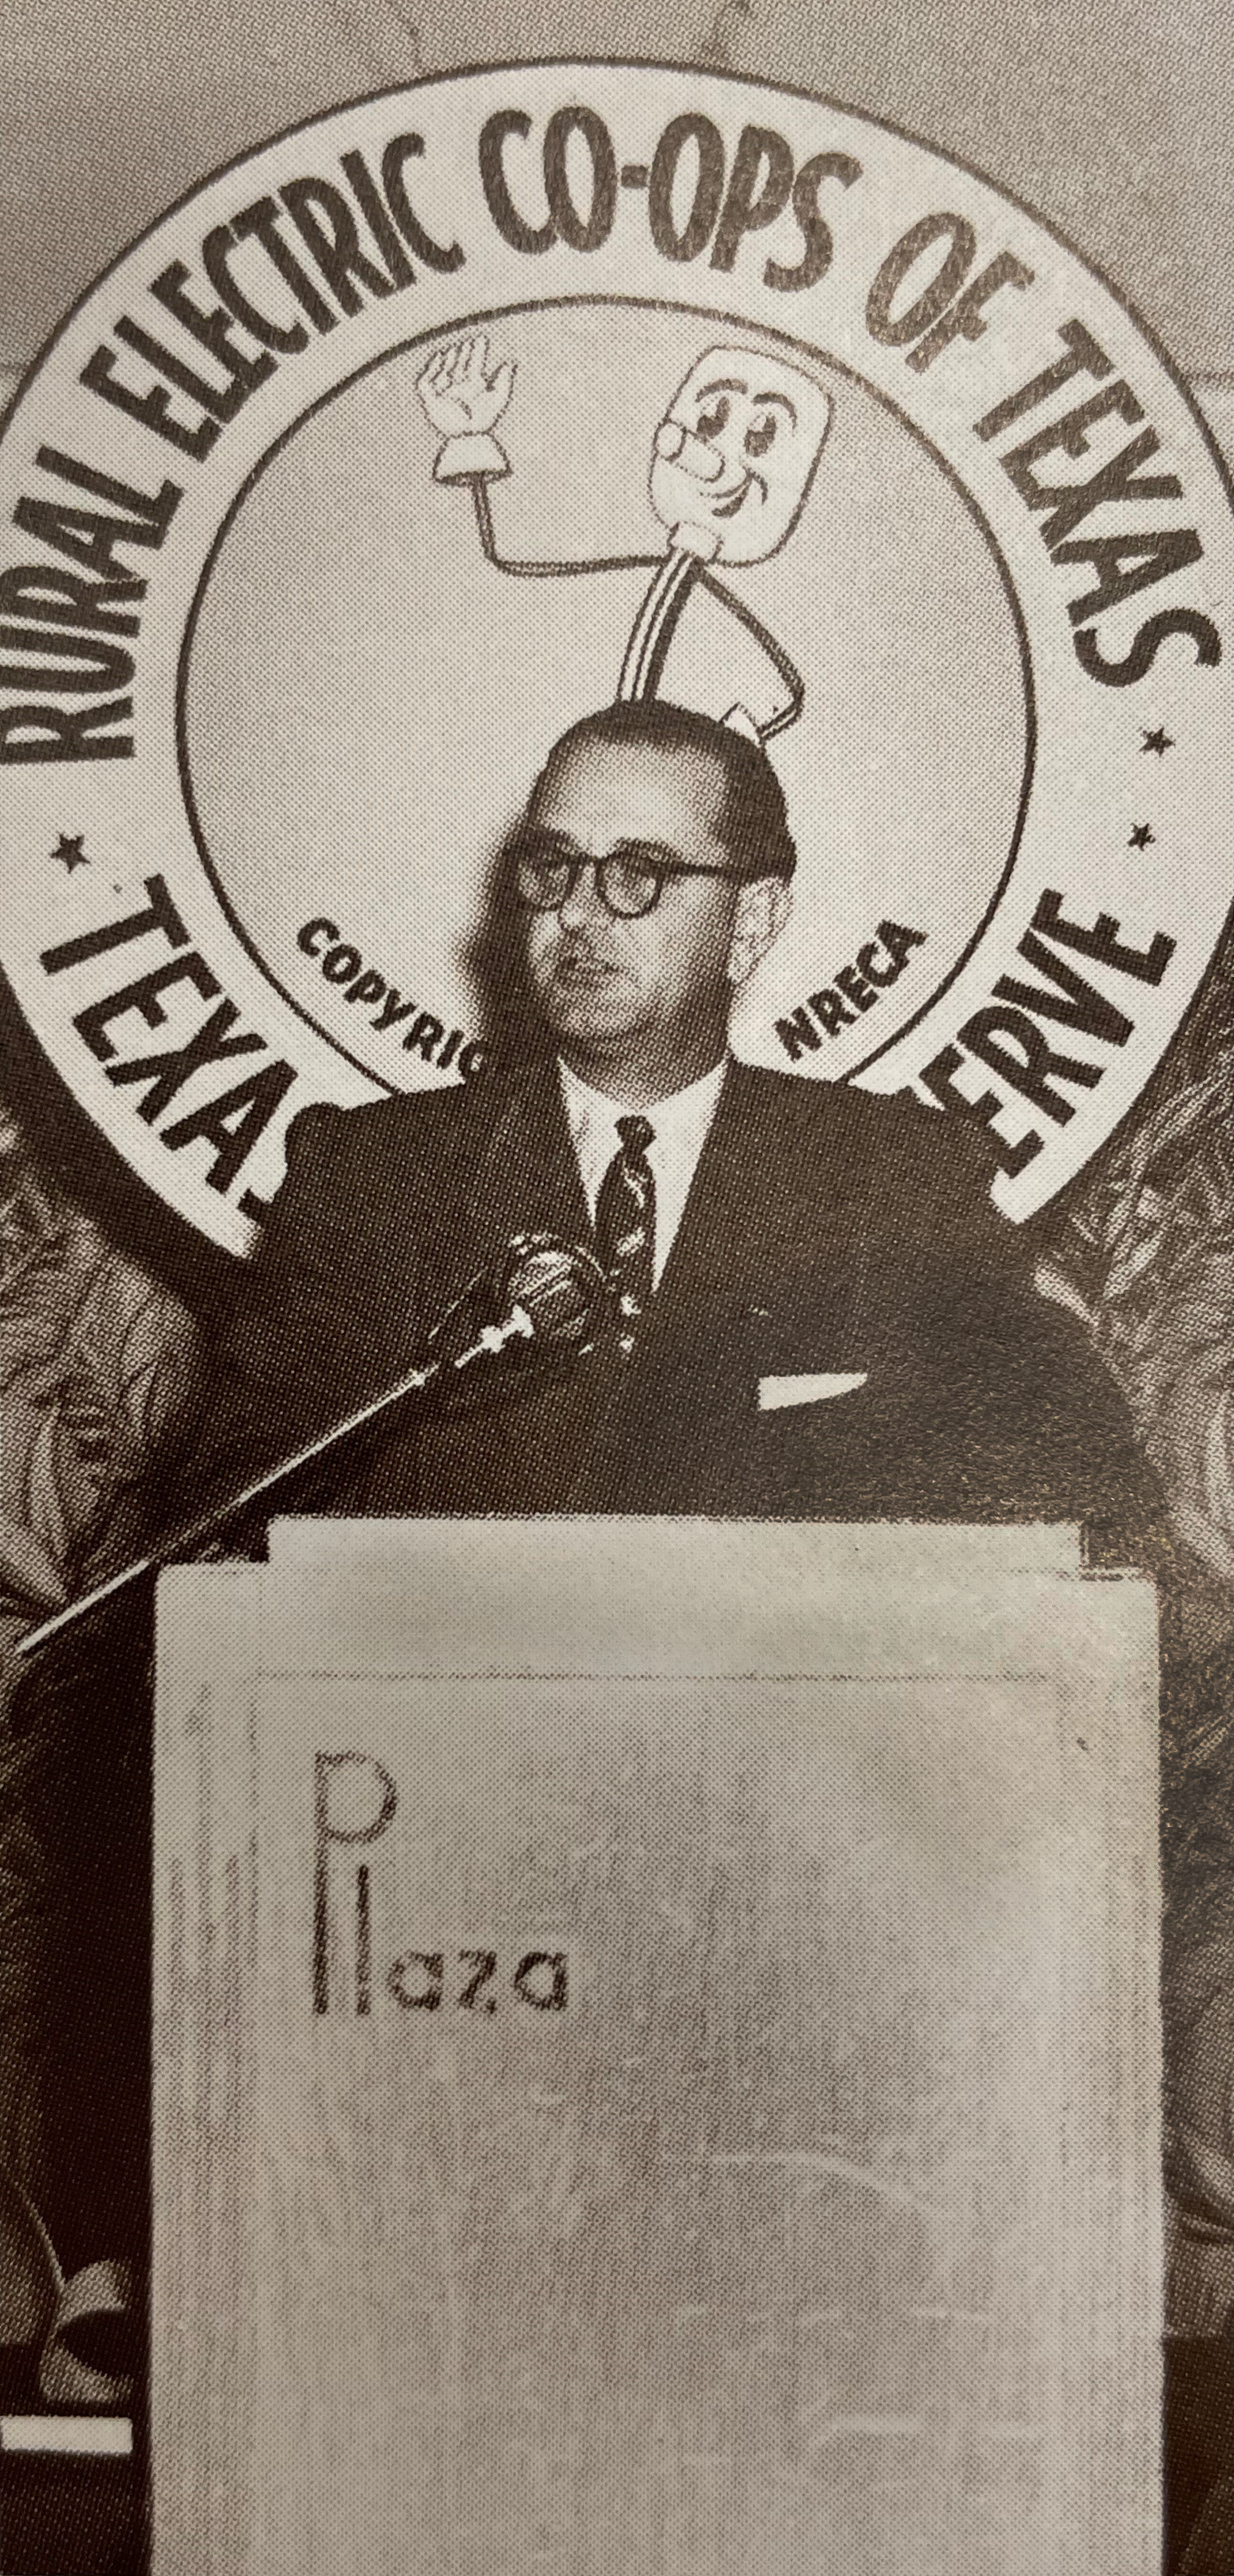 Pictured: Future President Lyndon B. Johnson speaks at a 1952 meeting of rural electric cooperatives, in front of the likeness of NRECA mascot Willie Wiredhand. LBJ continued to be a supporter of the REA during his presidency. Source: “The Next Greatest Thing,” published by NRECA